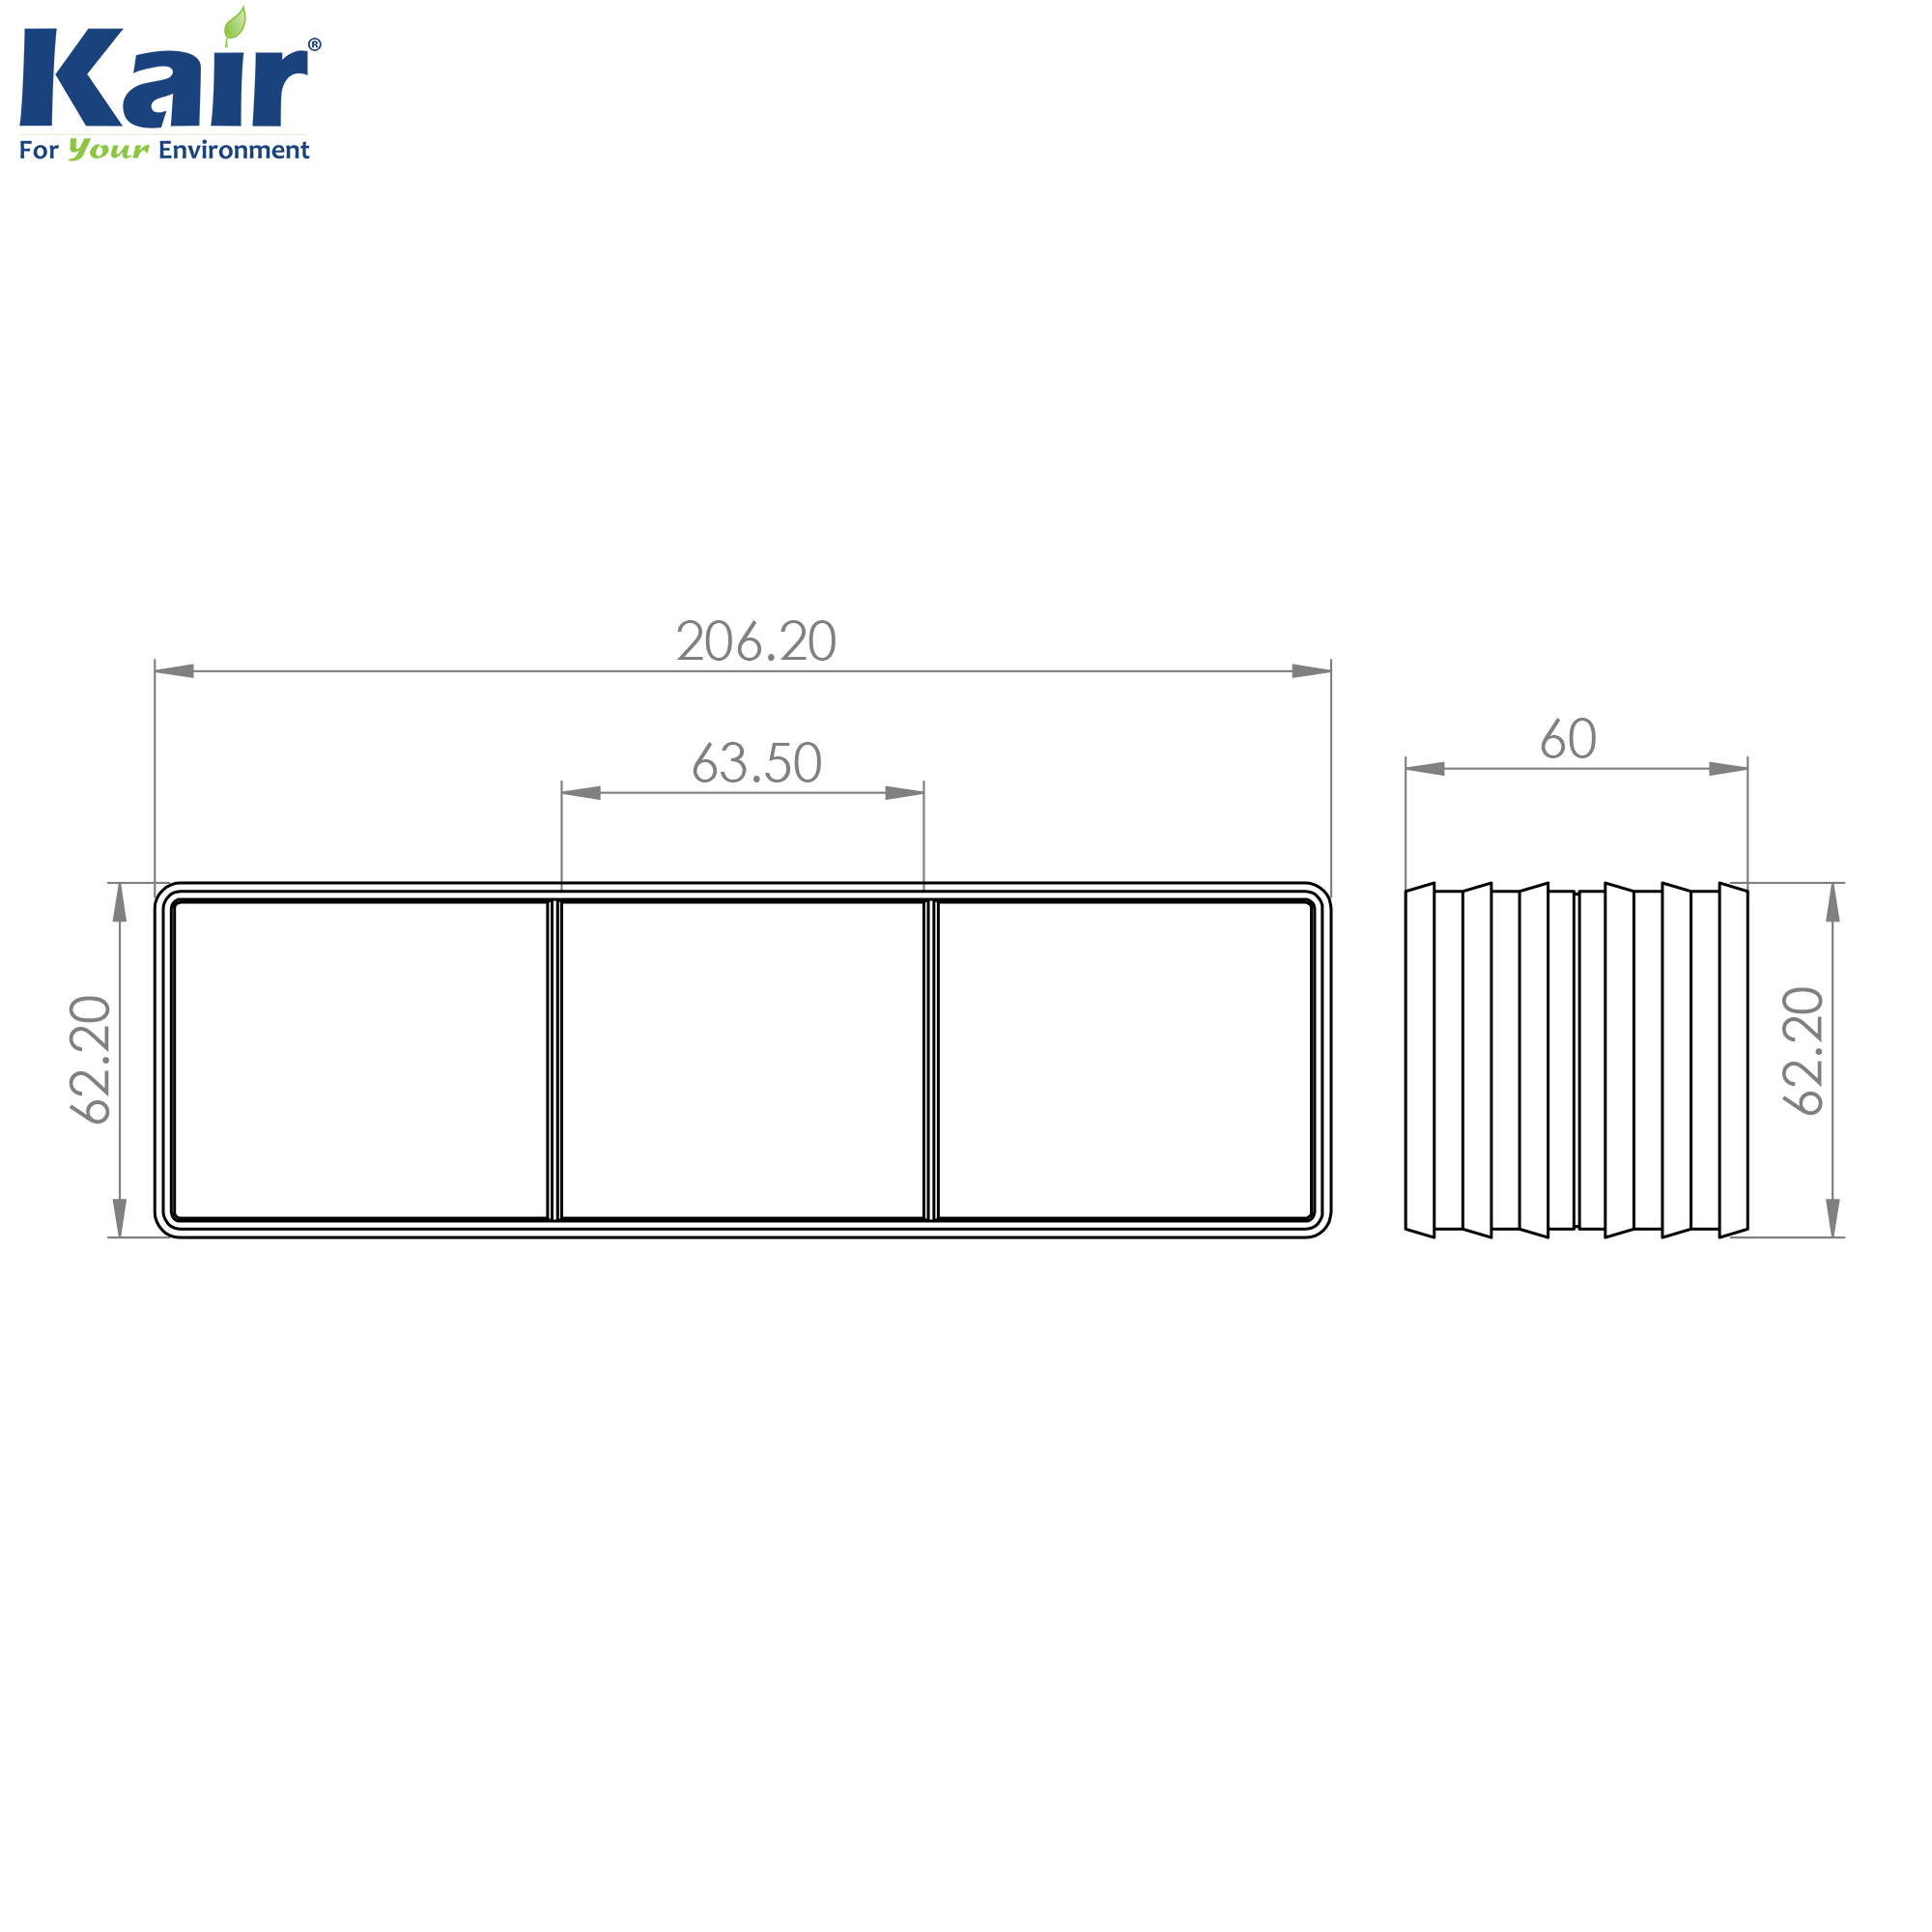 Male Duct To Duct Connector 204X60mm Self-Seal Thermal by Kair